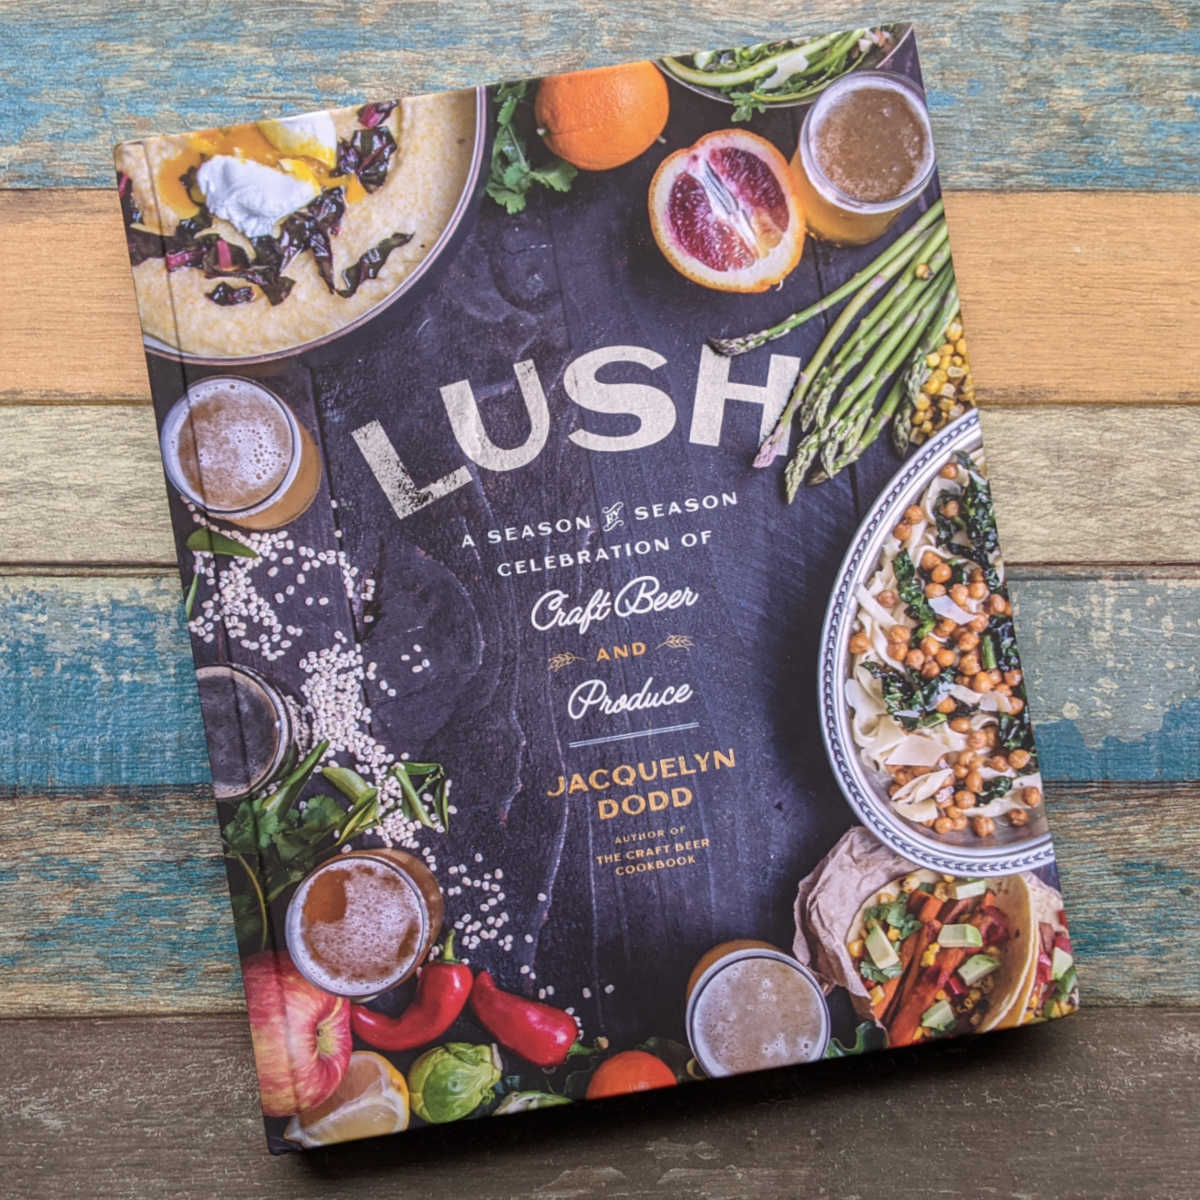 lush craft beer and produce cookbook